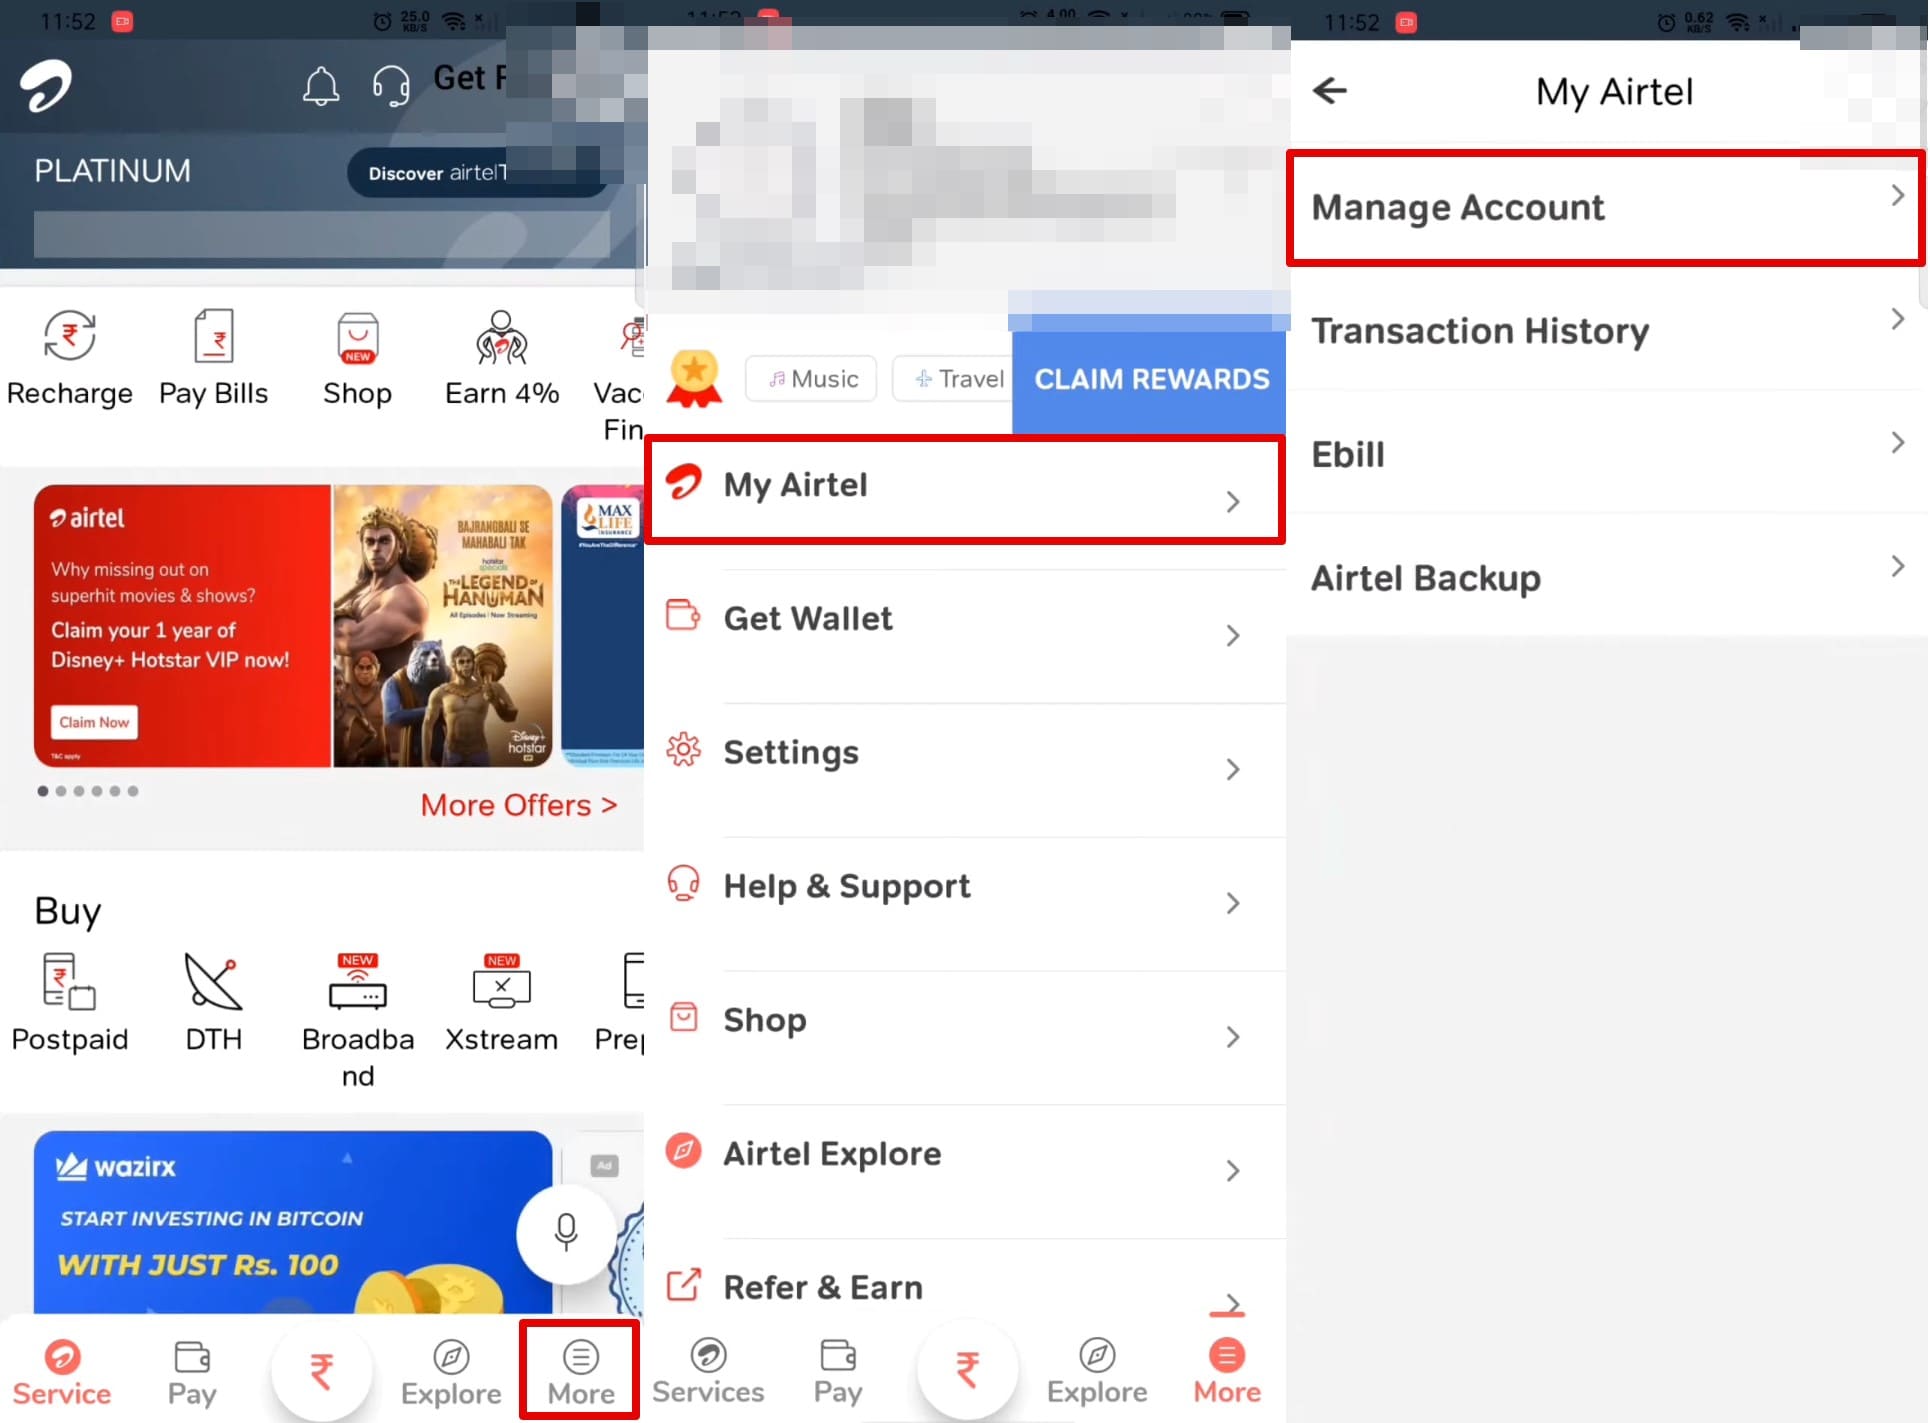 An image of how to manage data use on Airtel data plan